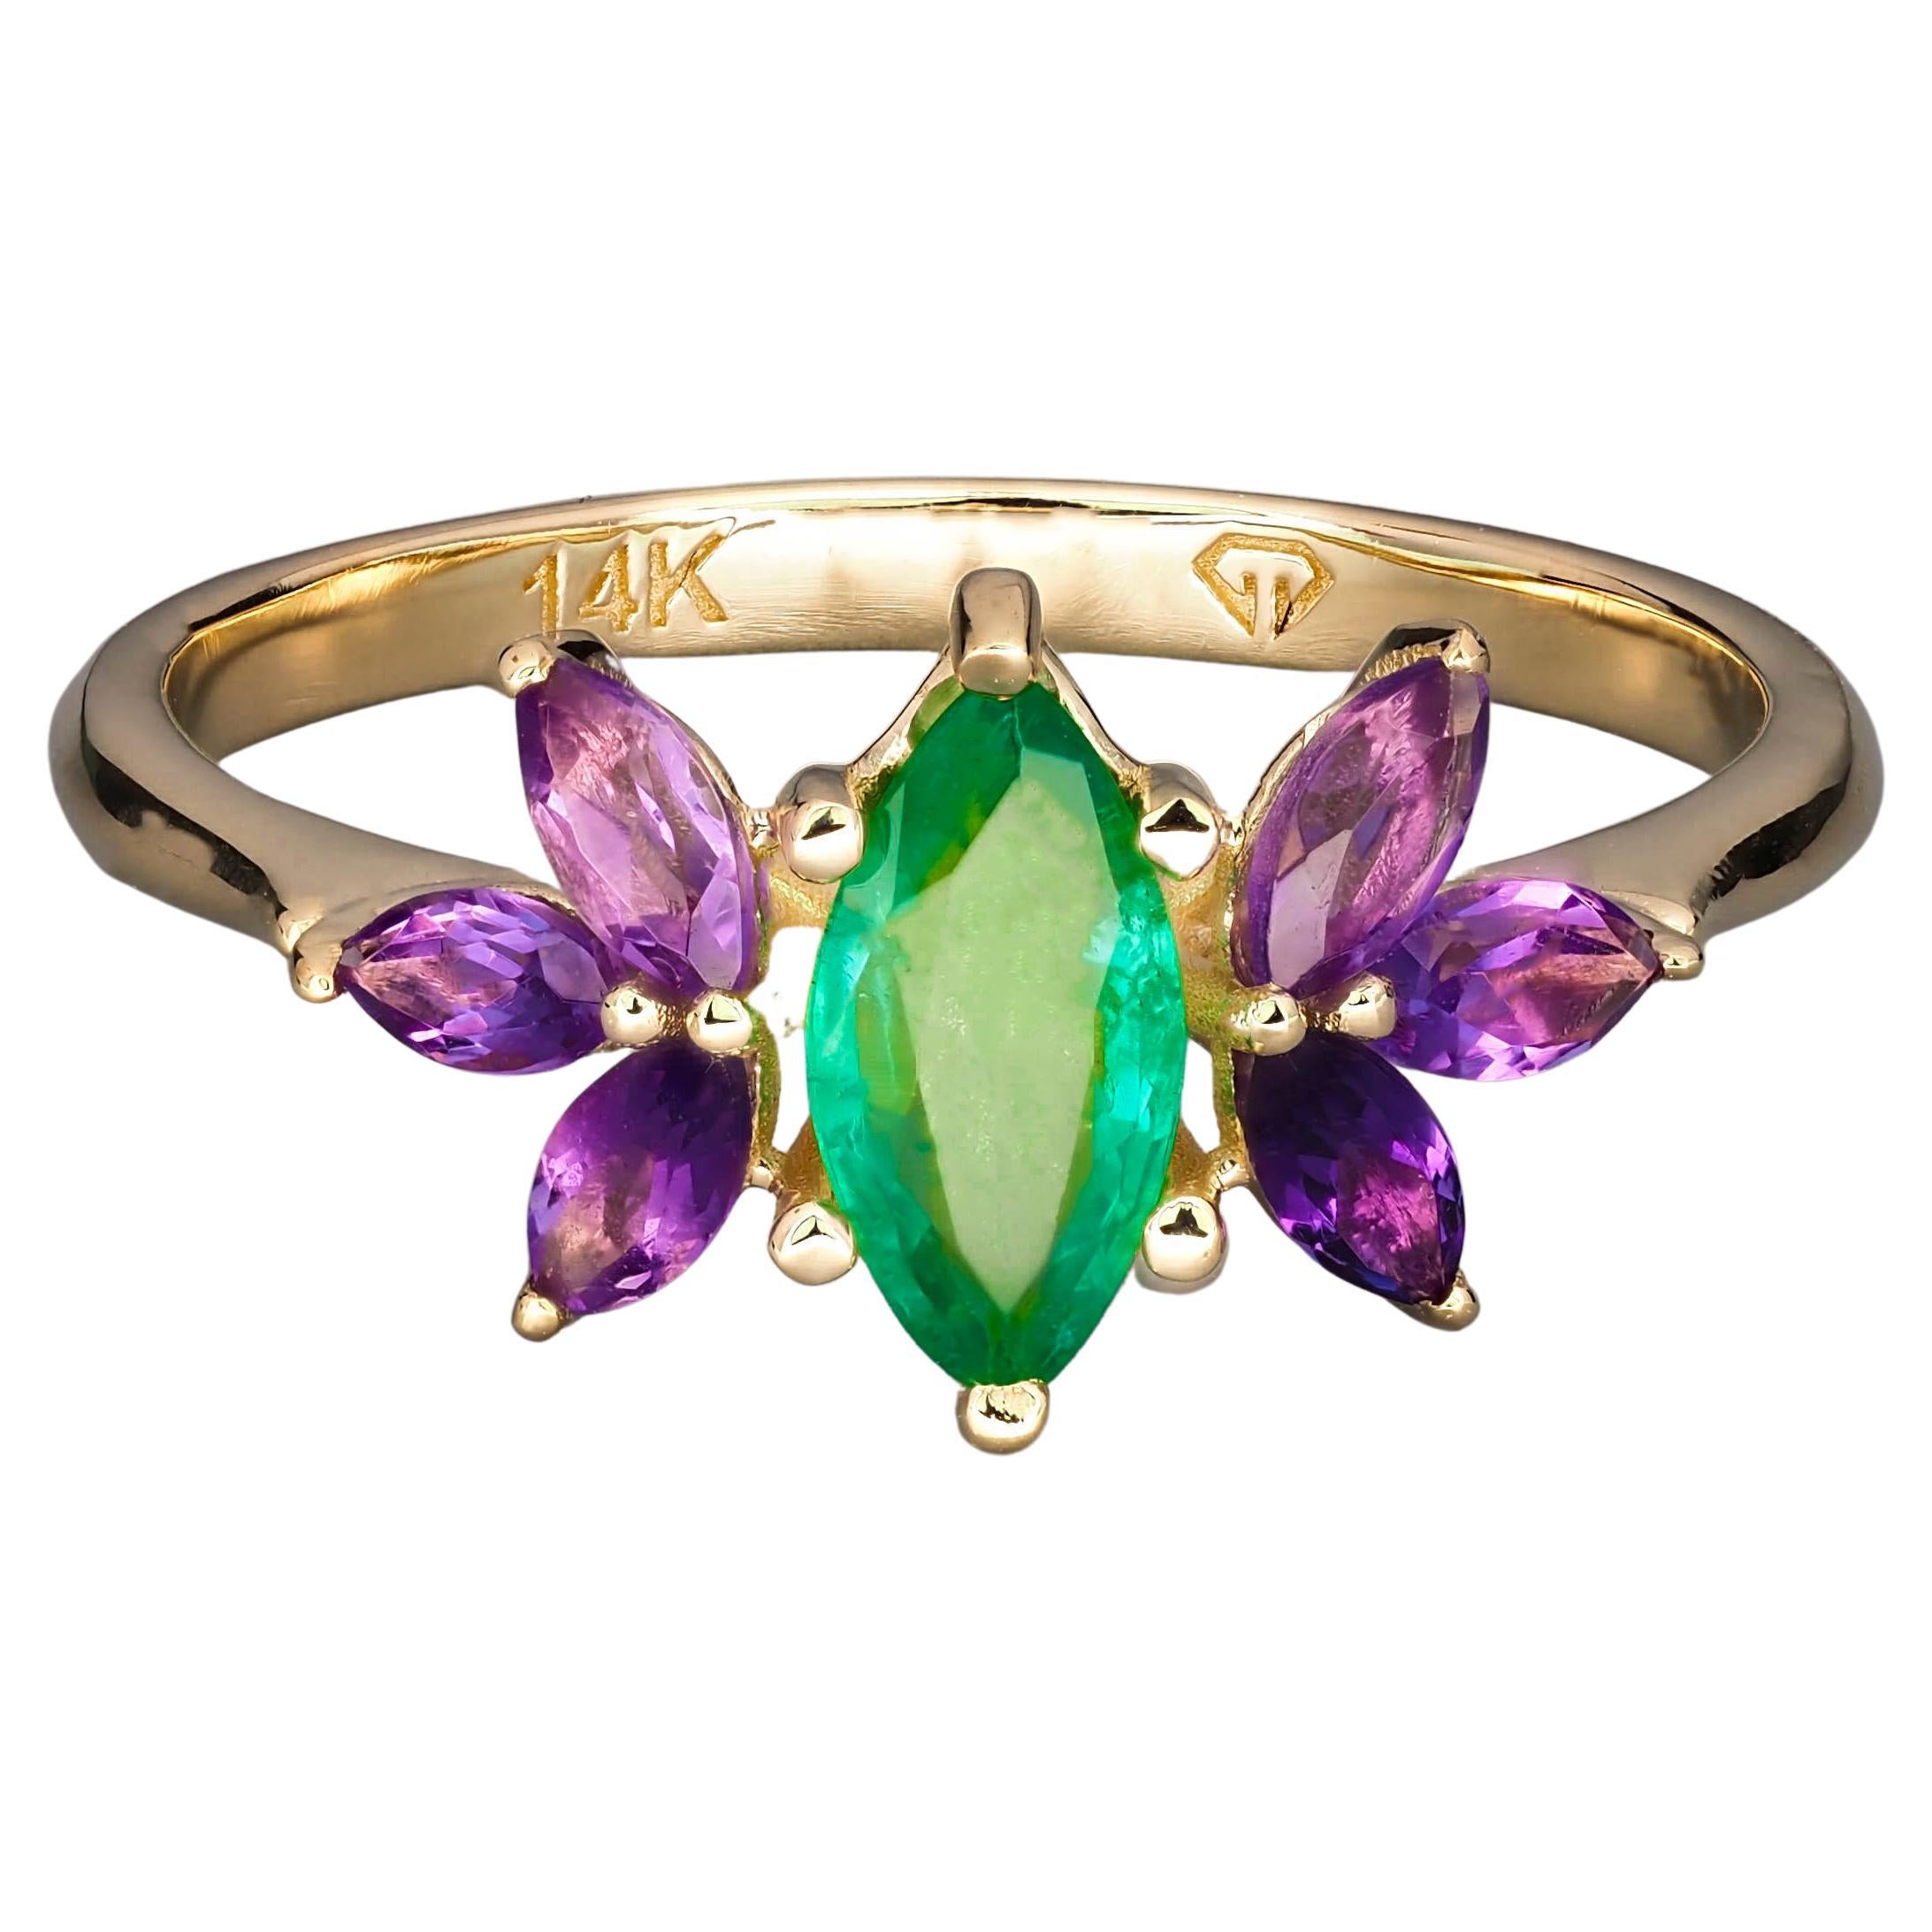 Emerald gold ring. 14k Gold Ring with Marquise Emerald and Amethysts. 